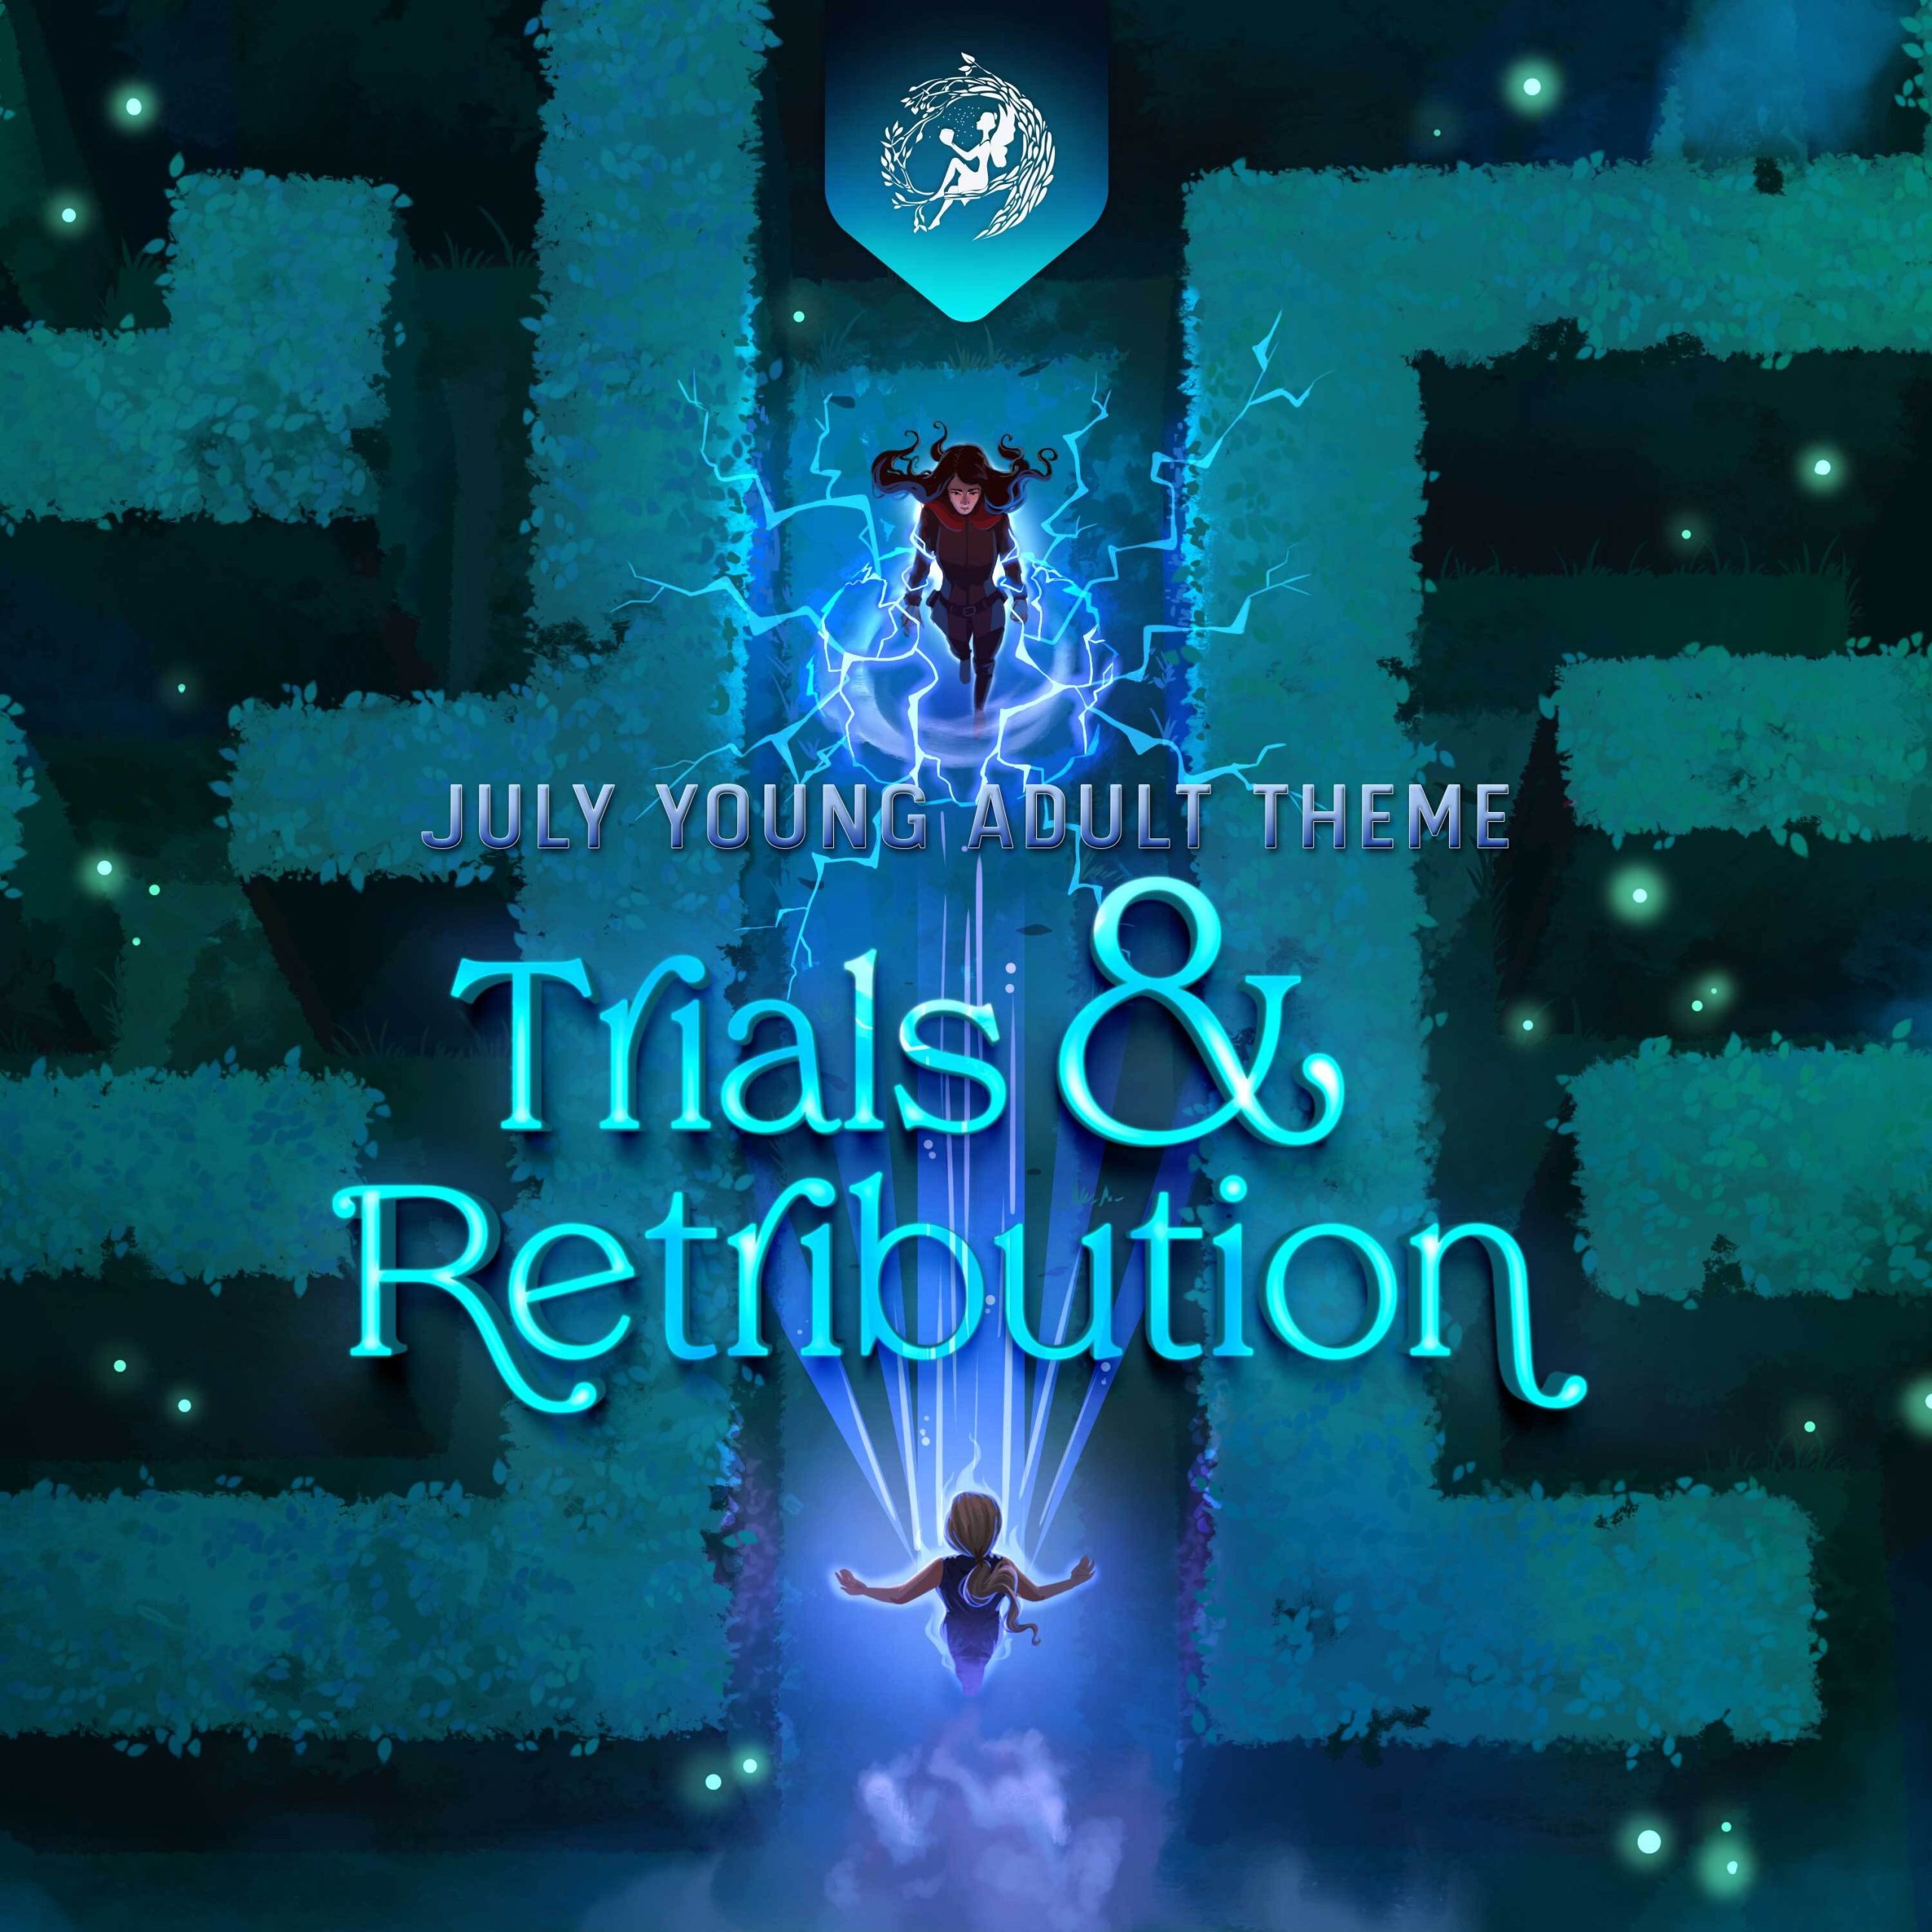 July Young Adult Theme: TRIALS & RETRIBUTION